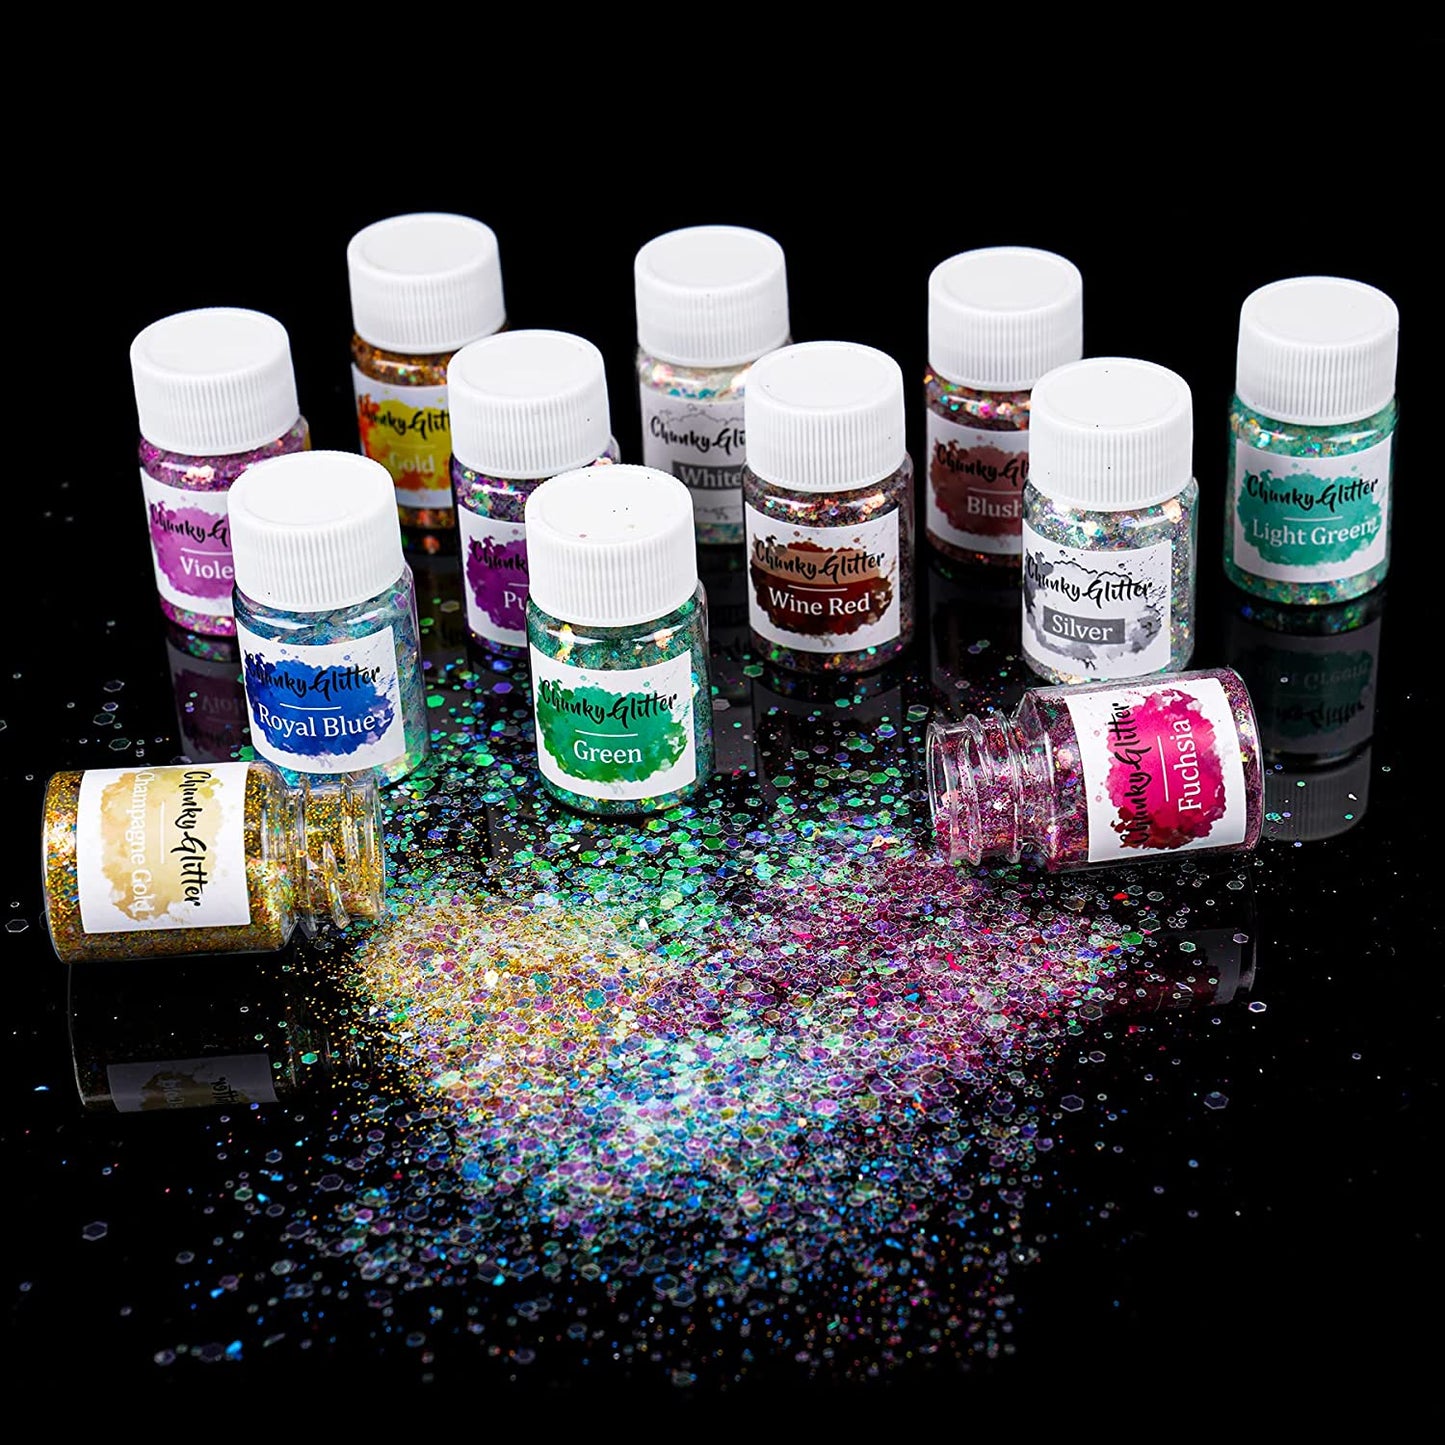 Holographic Chunky Glitters 12 Colors Sequins DIY Art Craft Cosmetic 0.35oz Each